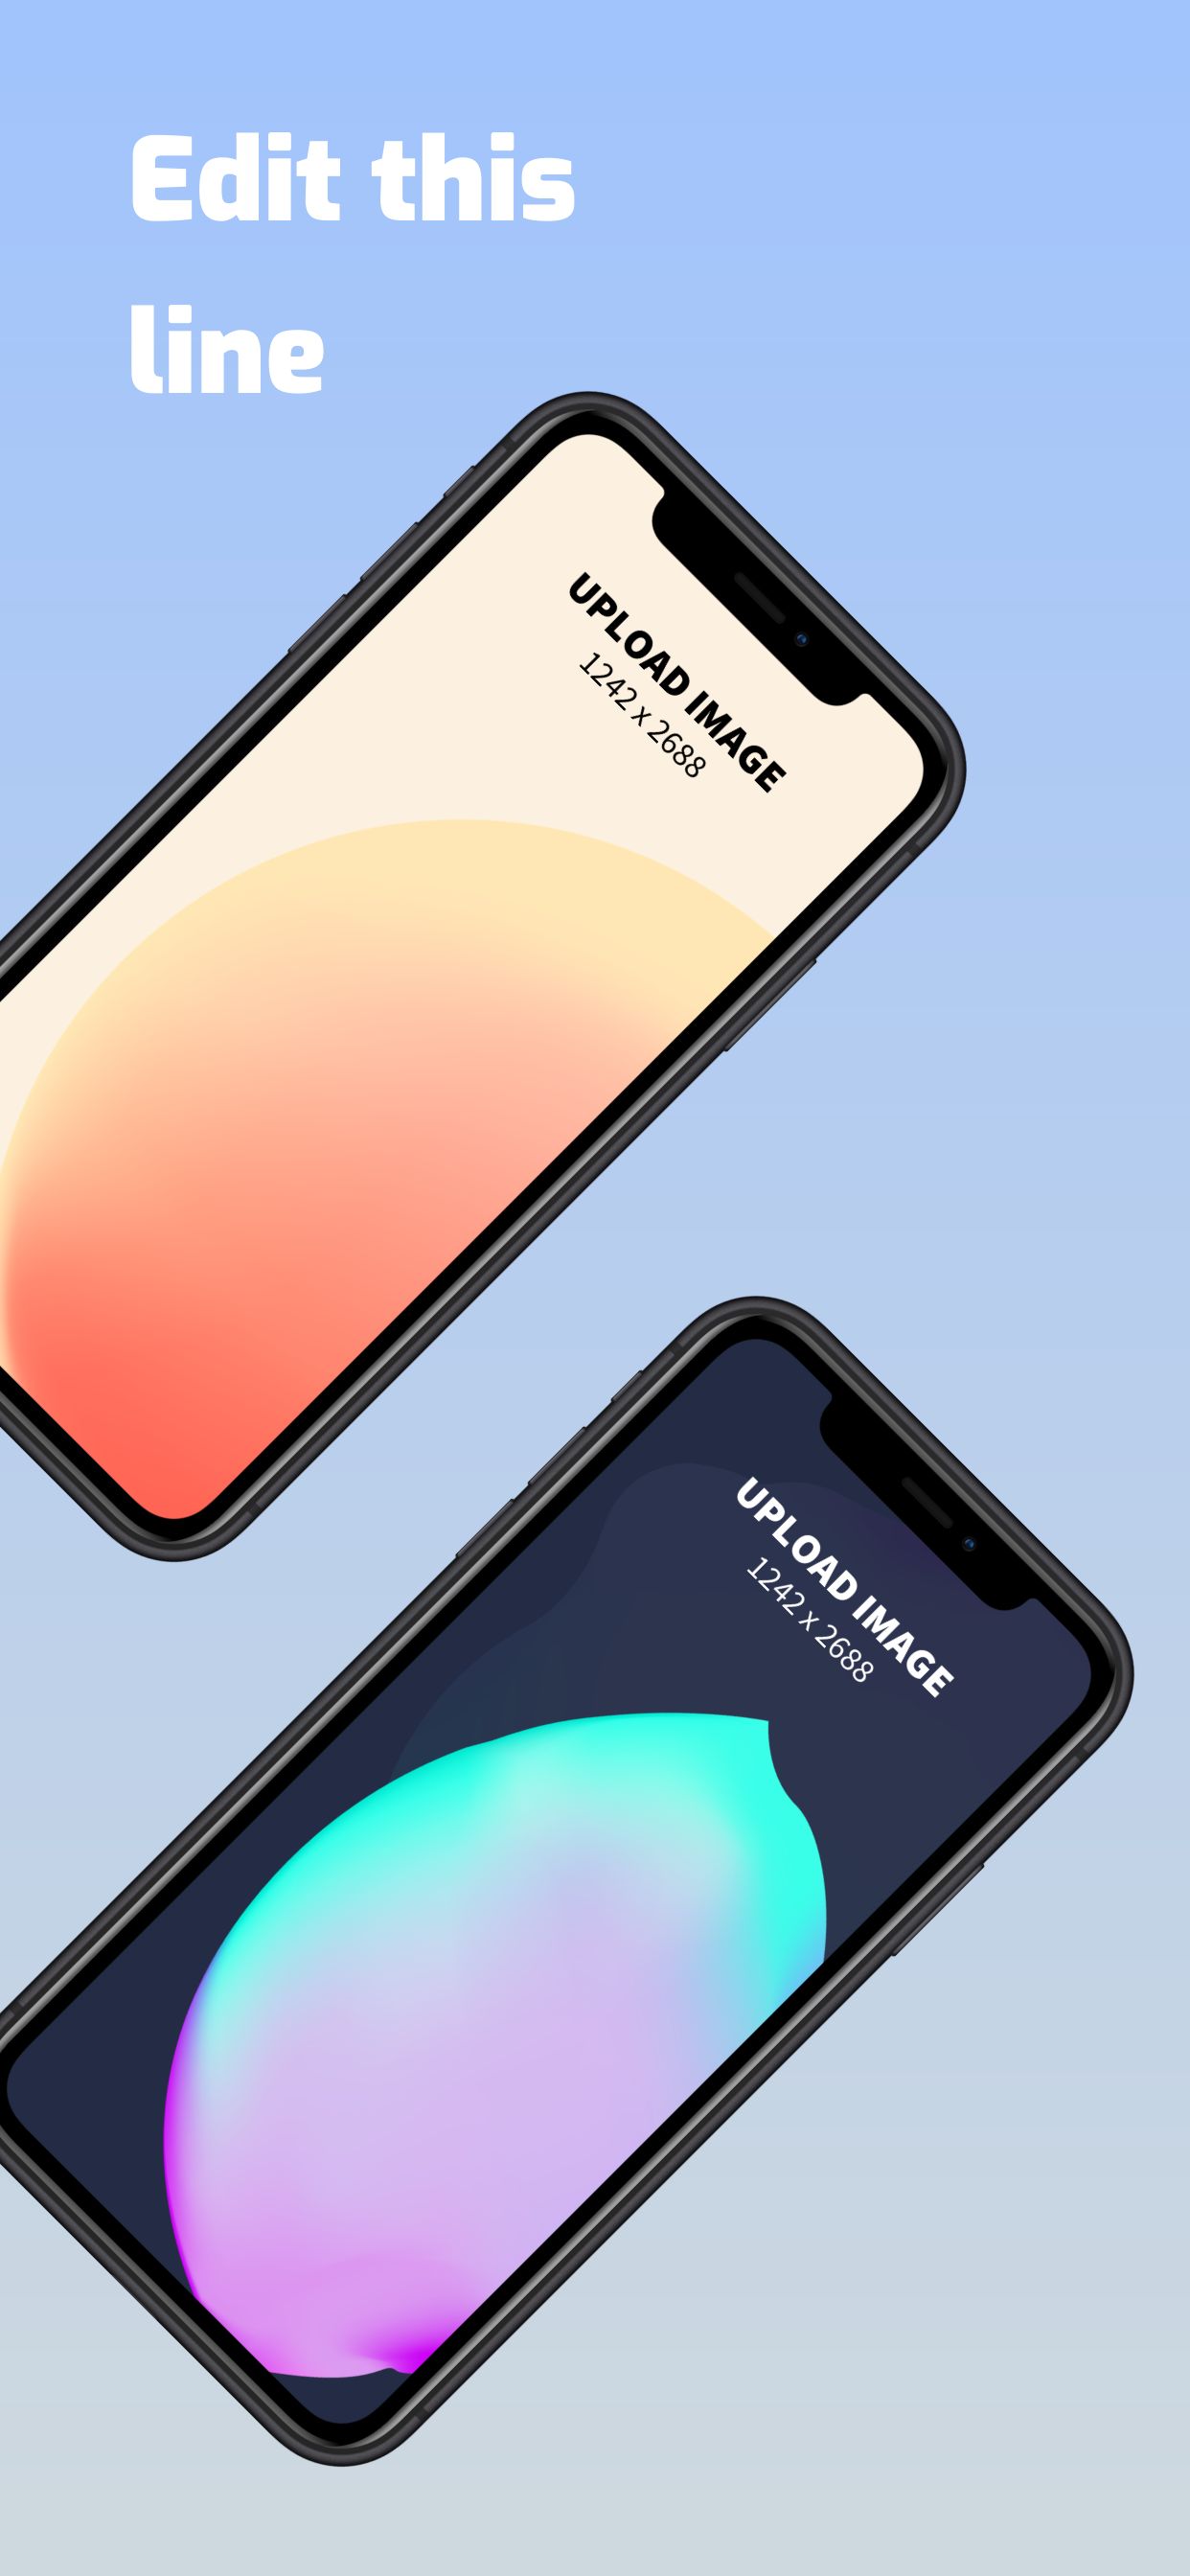 iPhone XS Max Screenshot 9 template. Quickly edit text, colors, images, and more for free.